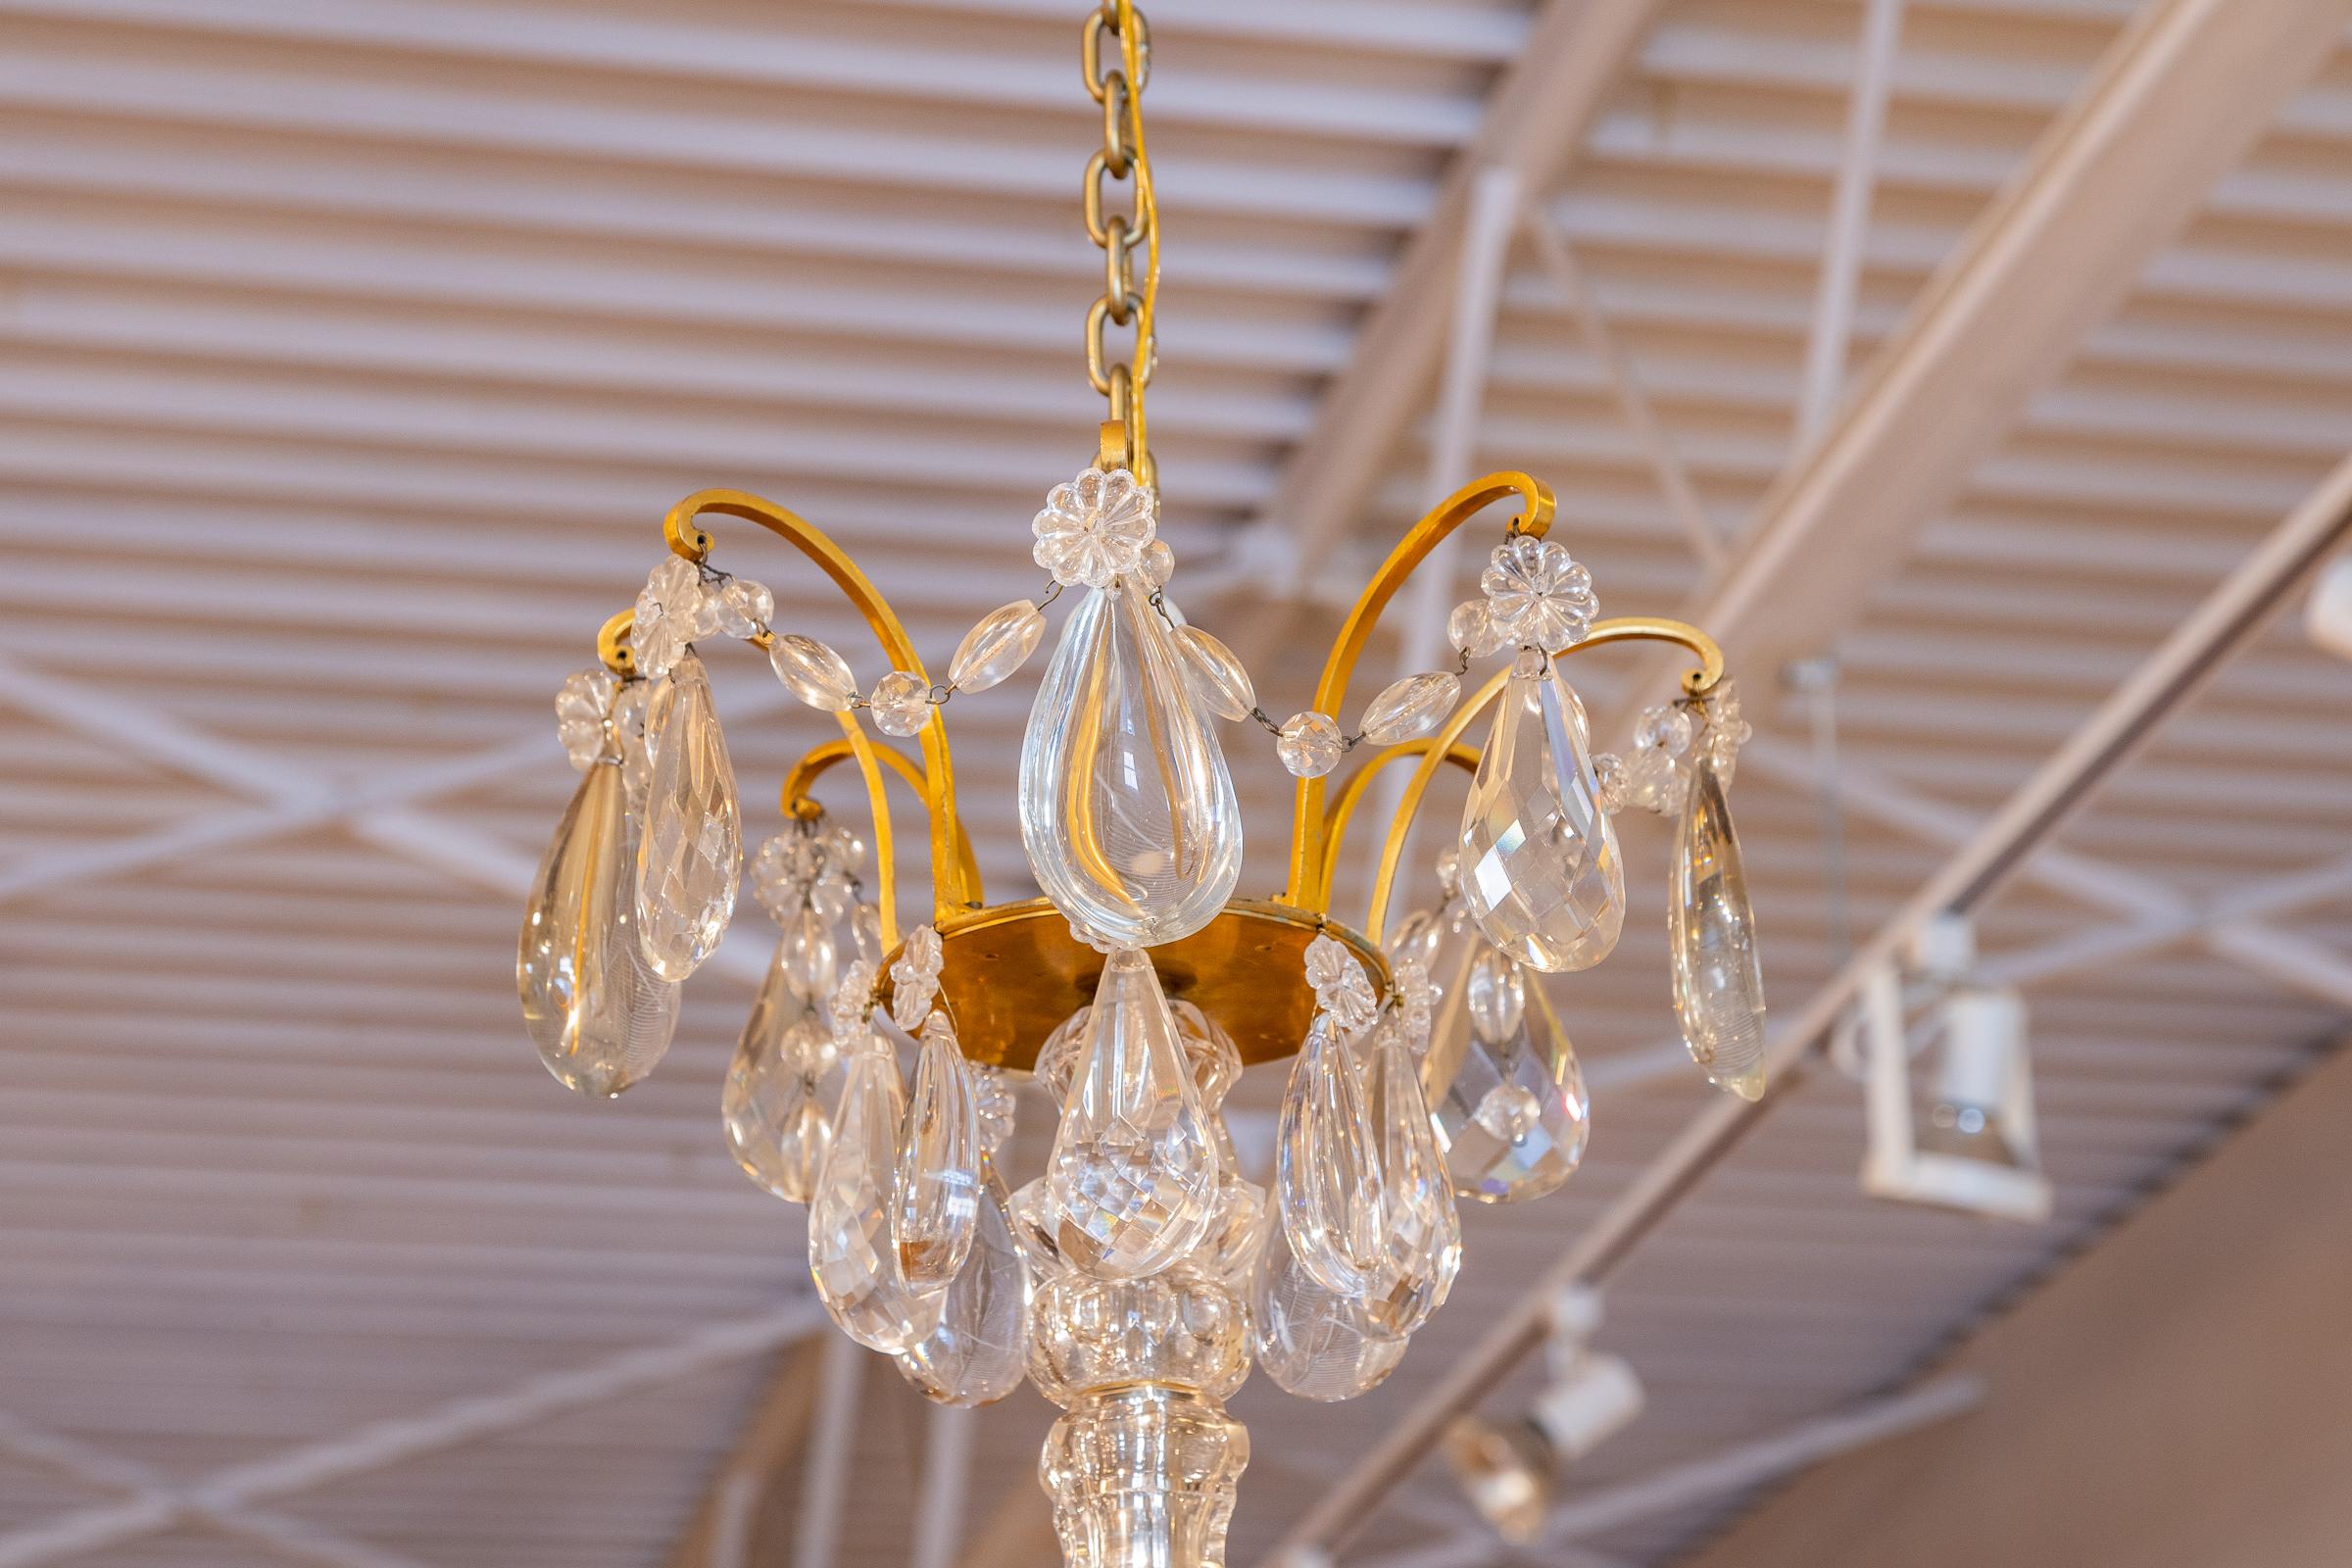 Fine 19th C French Louis XVI Crystal and Gilt Bronze 8 Light Chandelier In Excellent Condition For Sale In Dallas, TX